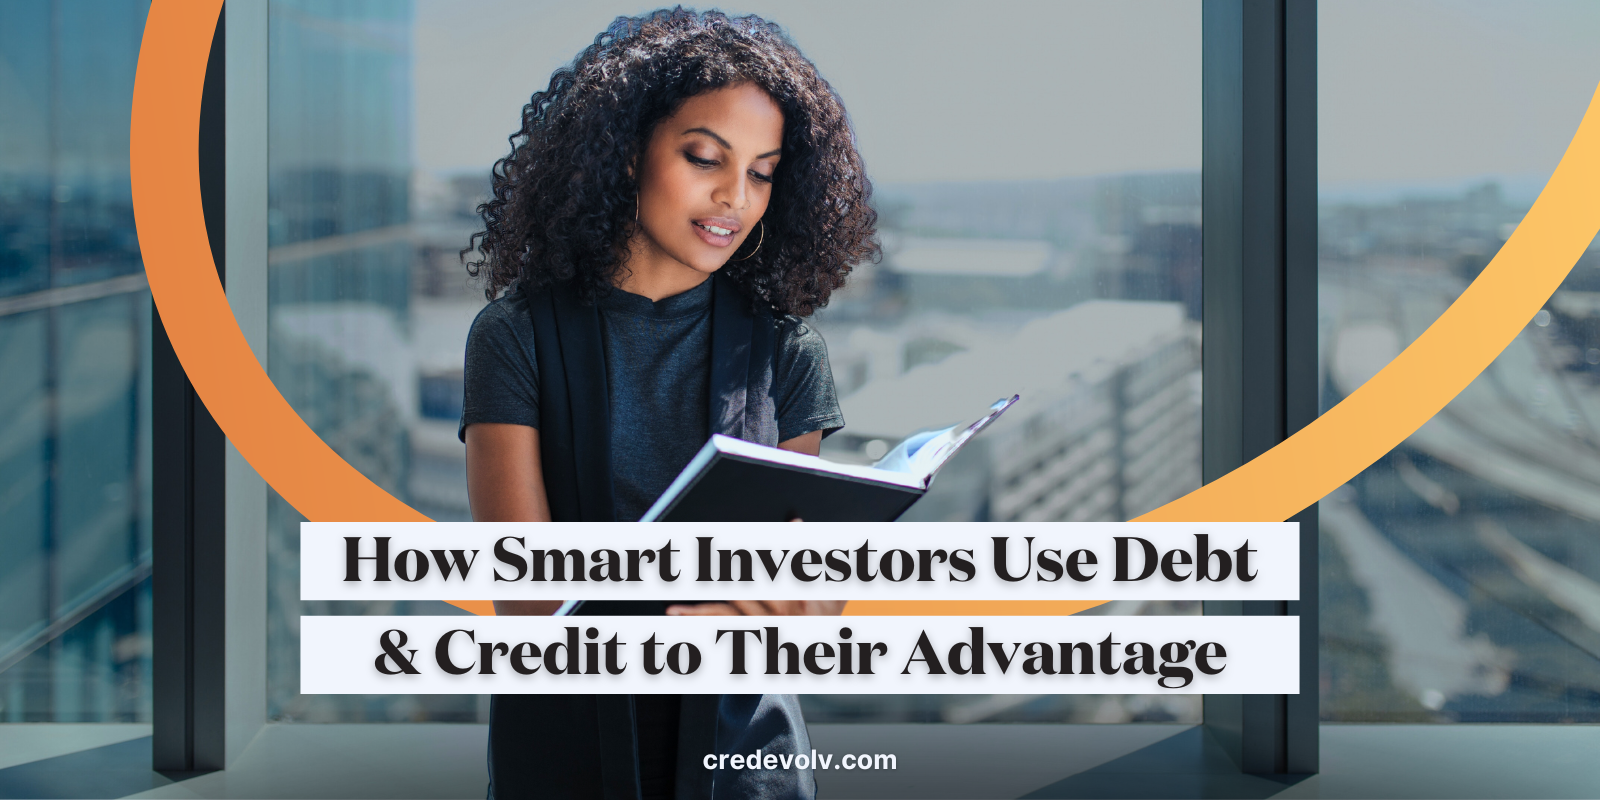 CredEvolv Blog - Featured Image - How smart investors use debt and credit to their advantage